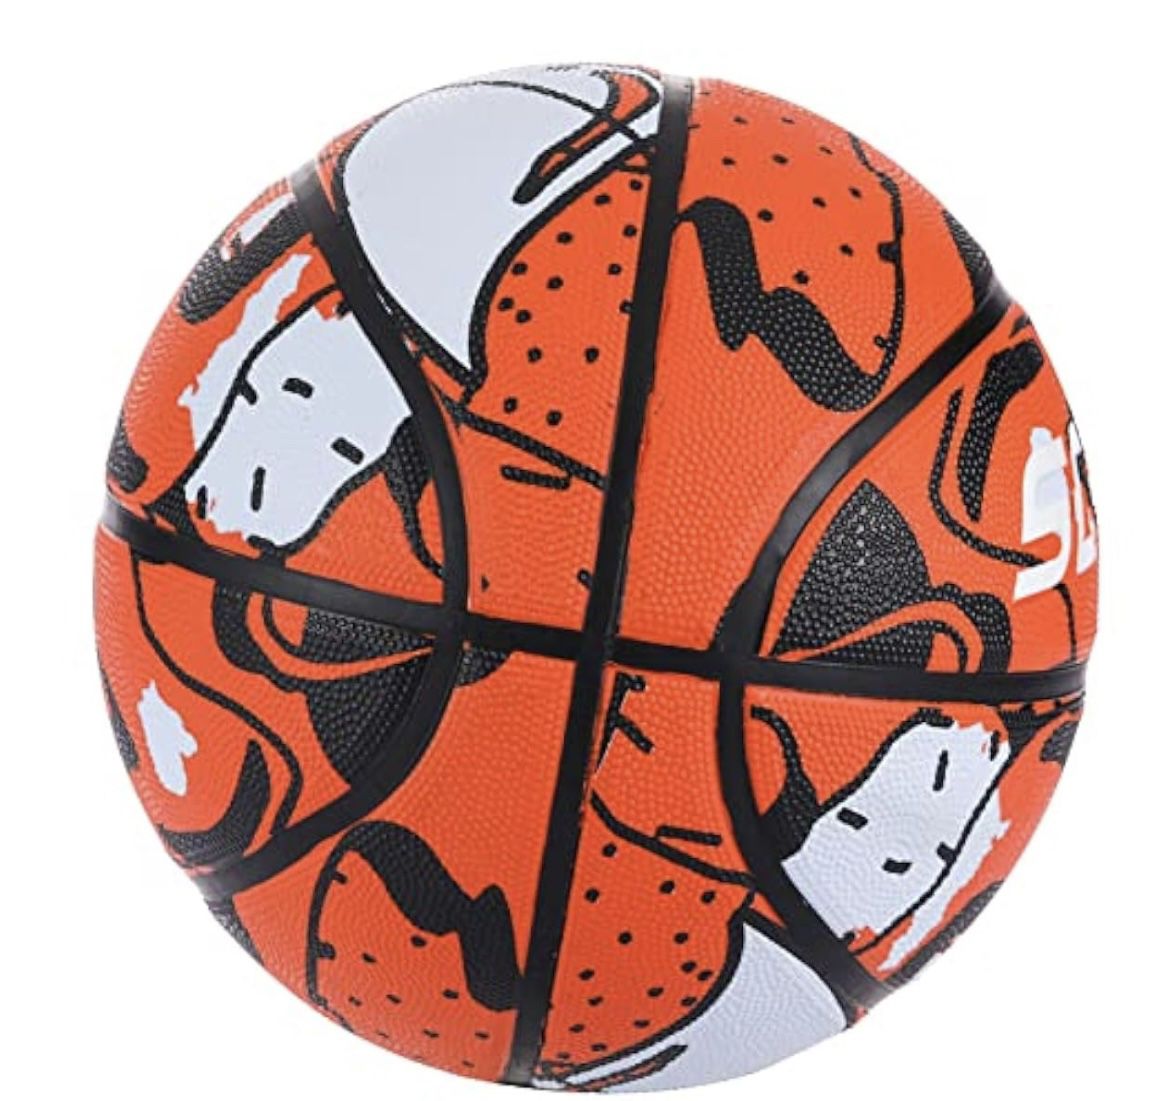 SQUAD Graffiti Basketball Size 7 | (29.5), Durable Rubber Basketball Ball For Indoor & Outdoor Play